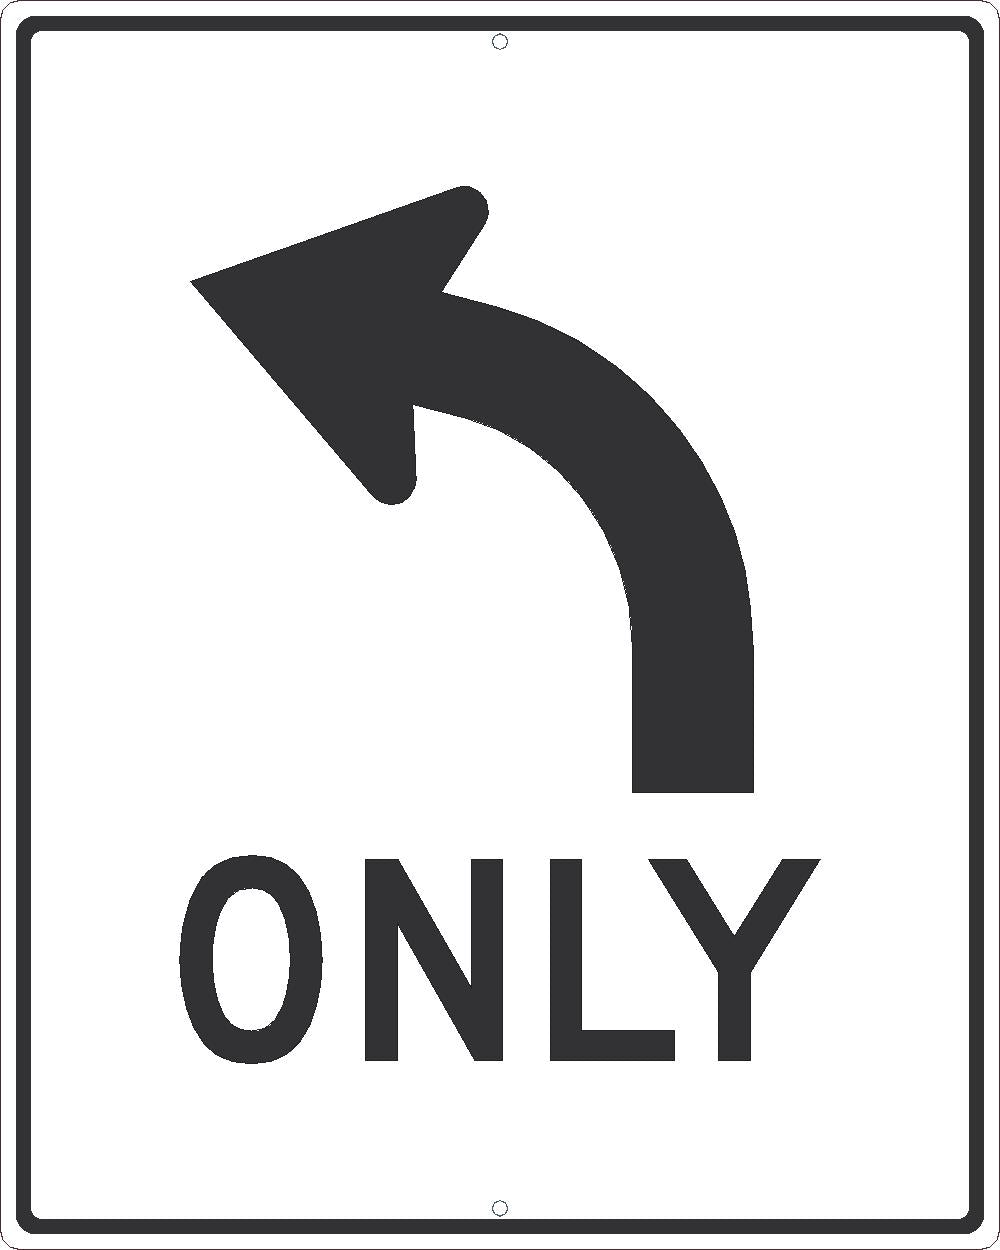 Only (Left Turn Arrow With Graphic)Sign, 30X24,.080 Hip Ref Alum - TM521K-eSafety Supplies, Inc